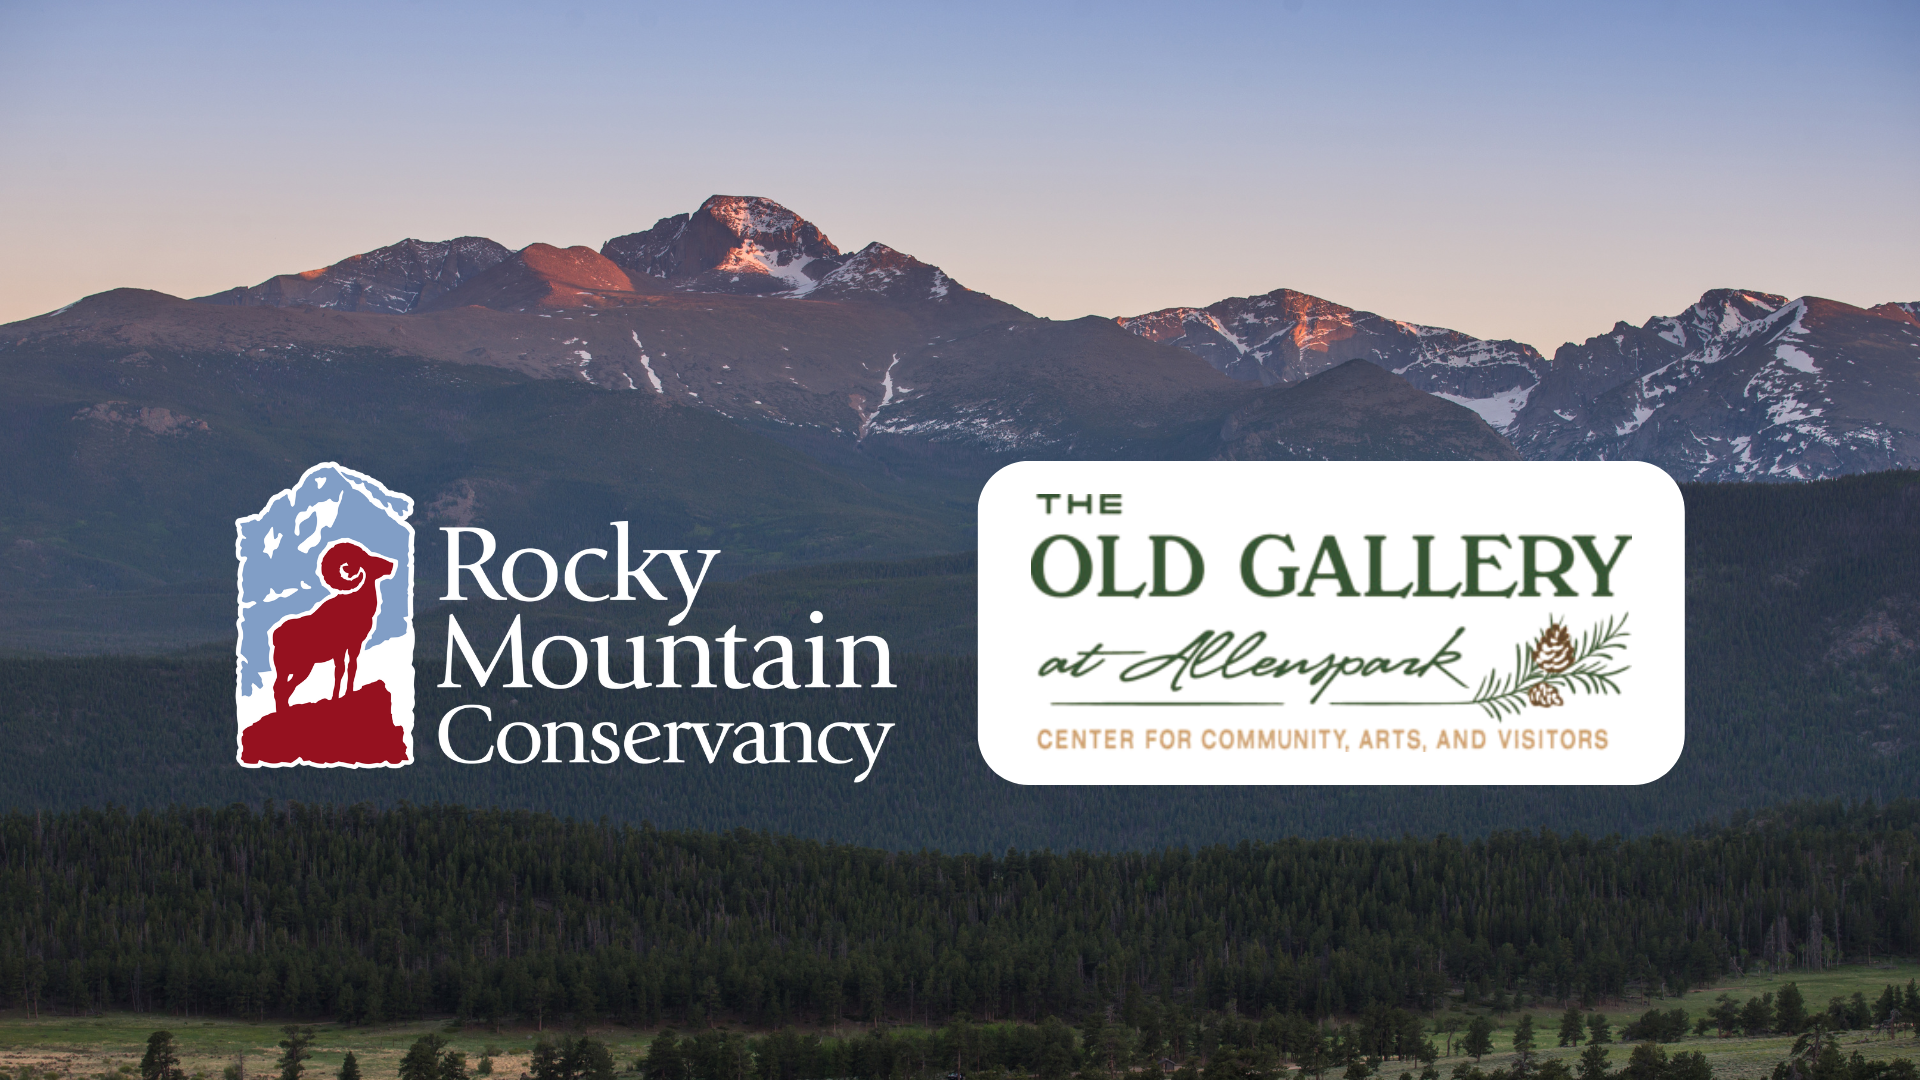 A distant view of Longs Peak at sunset, with tree-covered ridges in front of the peak, and grassy meadow in the foreground. The image is overlain by logs for the Rocky Mountain Conservancy and The Old Gallery.